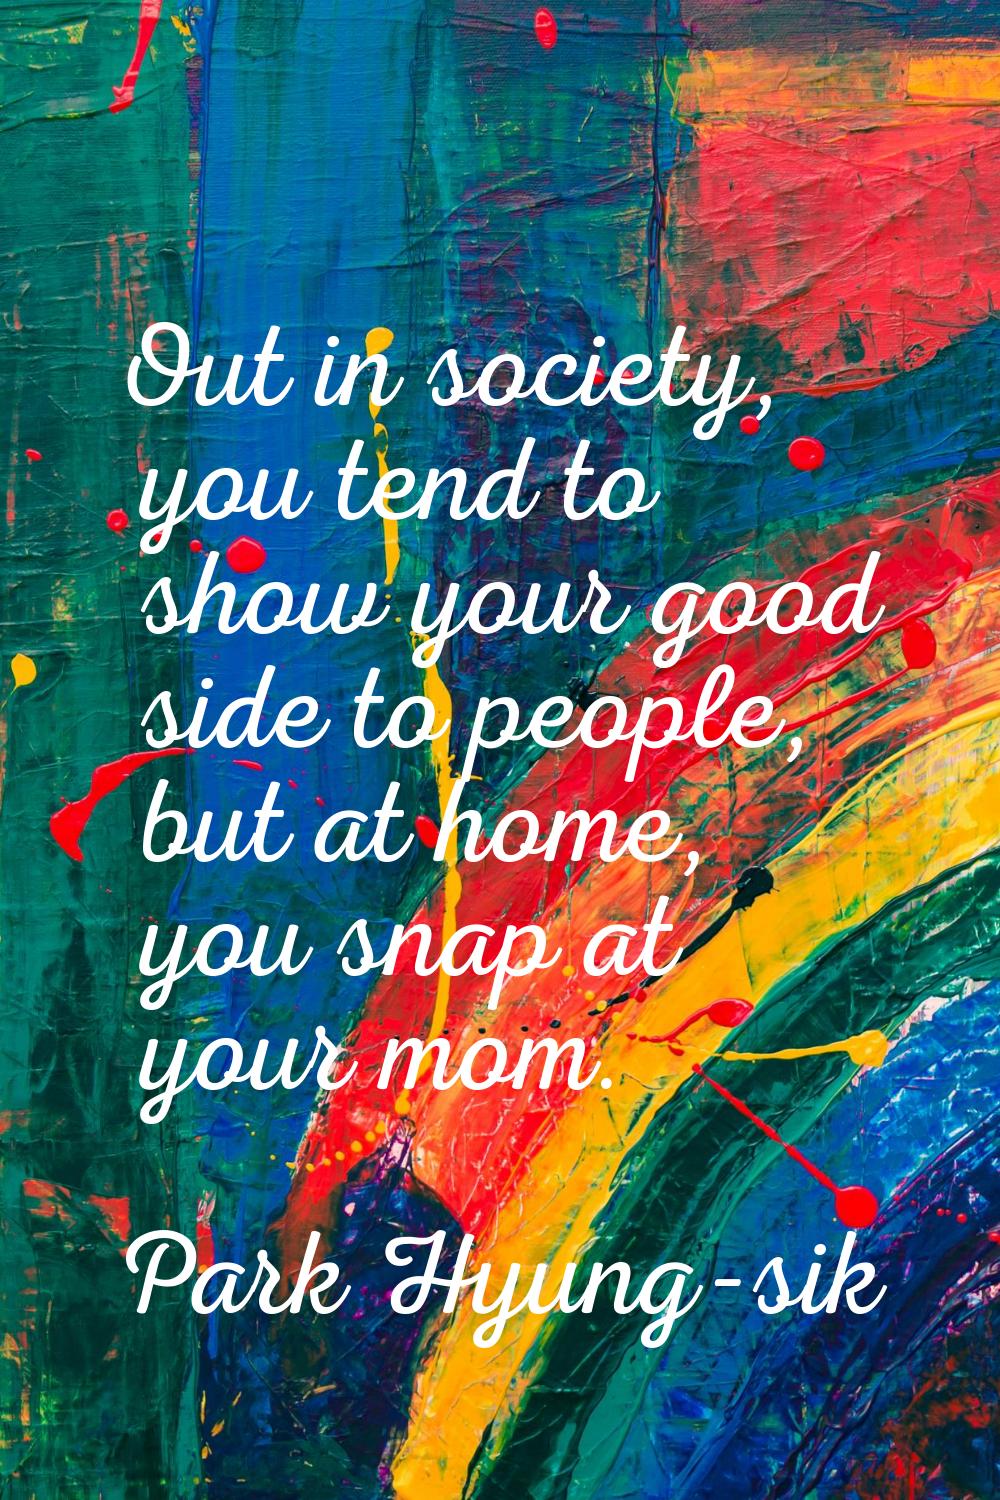 Out in society, you tend to show your good side to people, but at home, you snap at your mom.